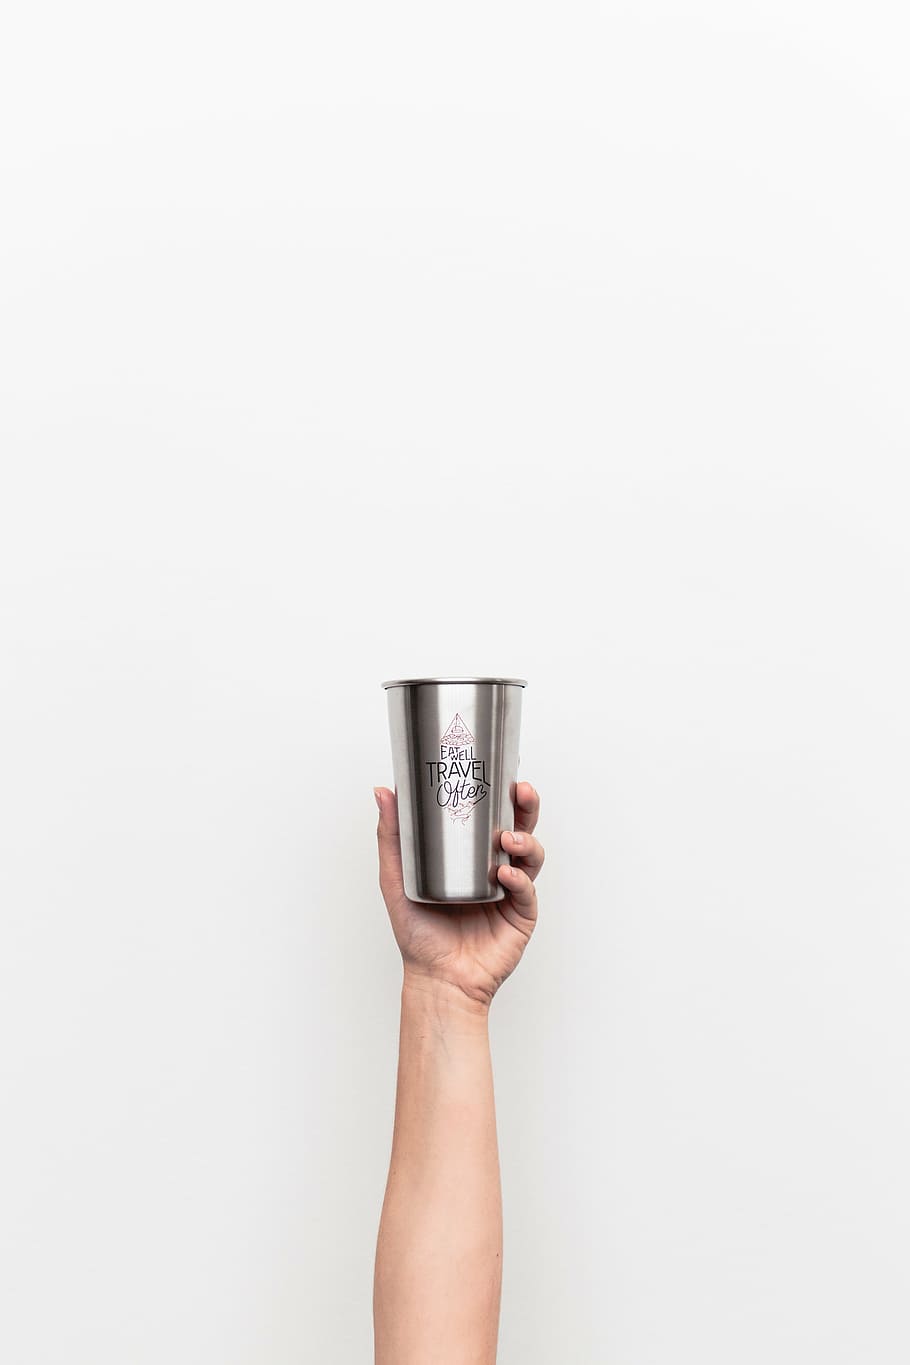 person, holding, gray, travel, stainless, steel drinking cup, white, background, bottle, mug